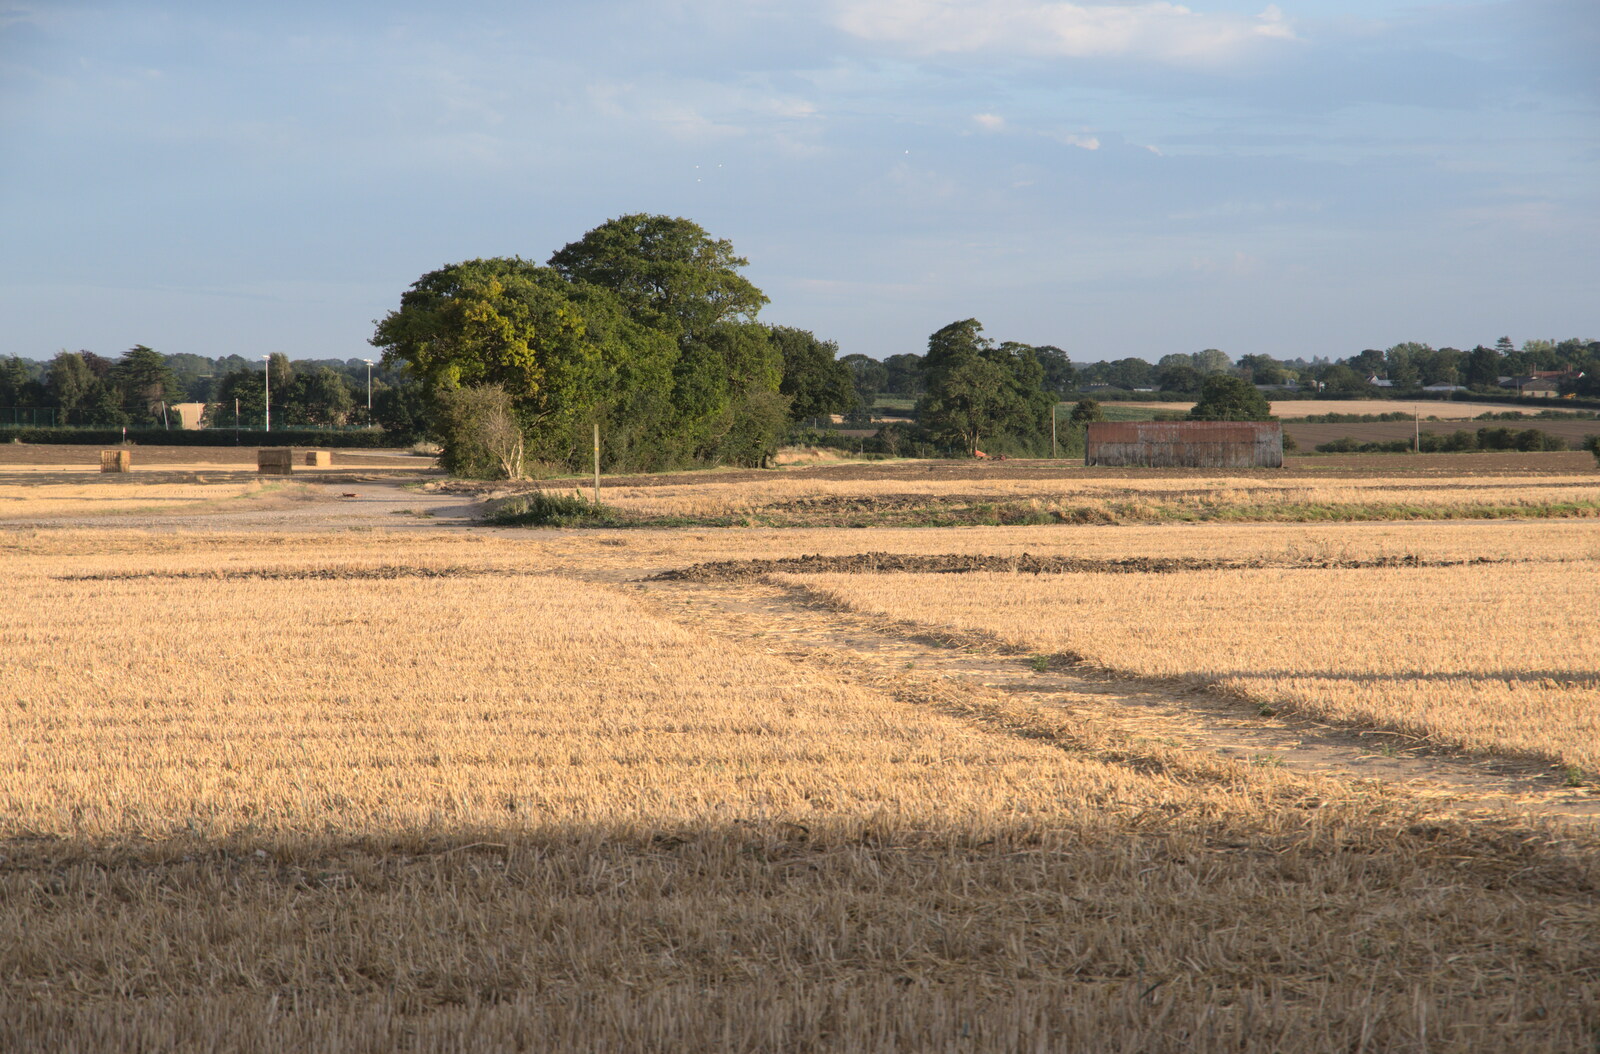 Looking over to the old fuse store from Eye Airfield with Mick the Brick, Eye, Suffolk - 5th August 2020